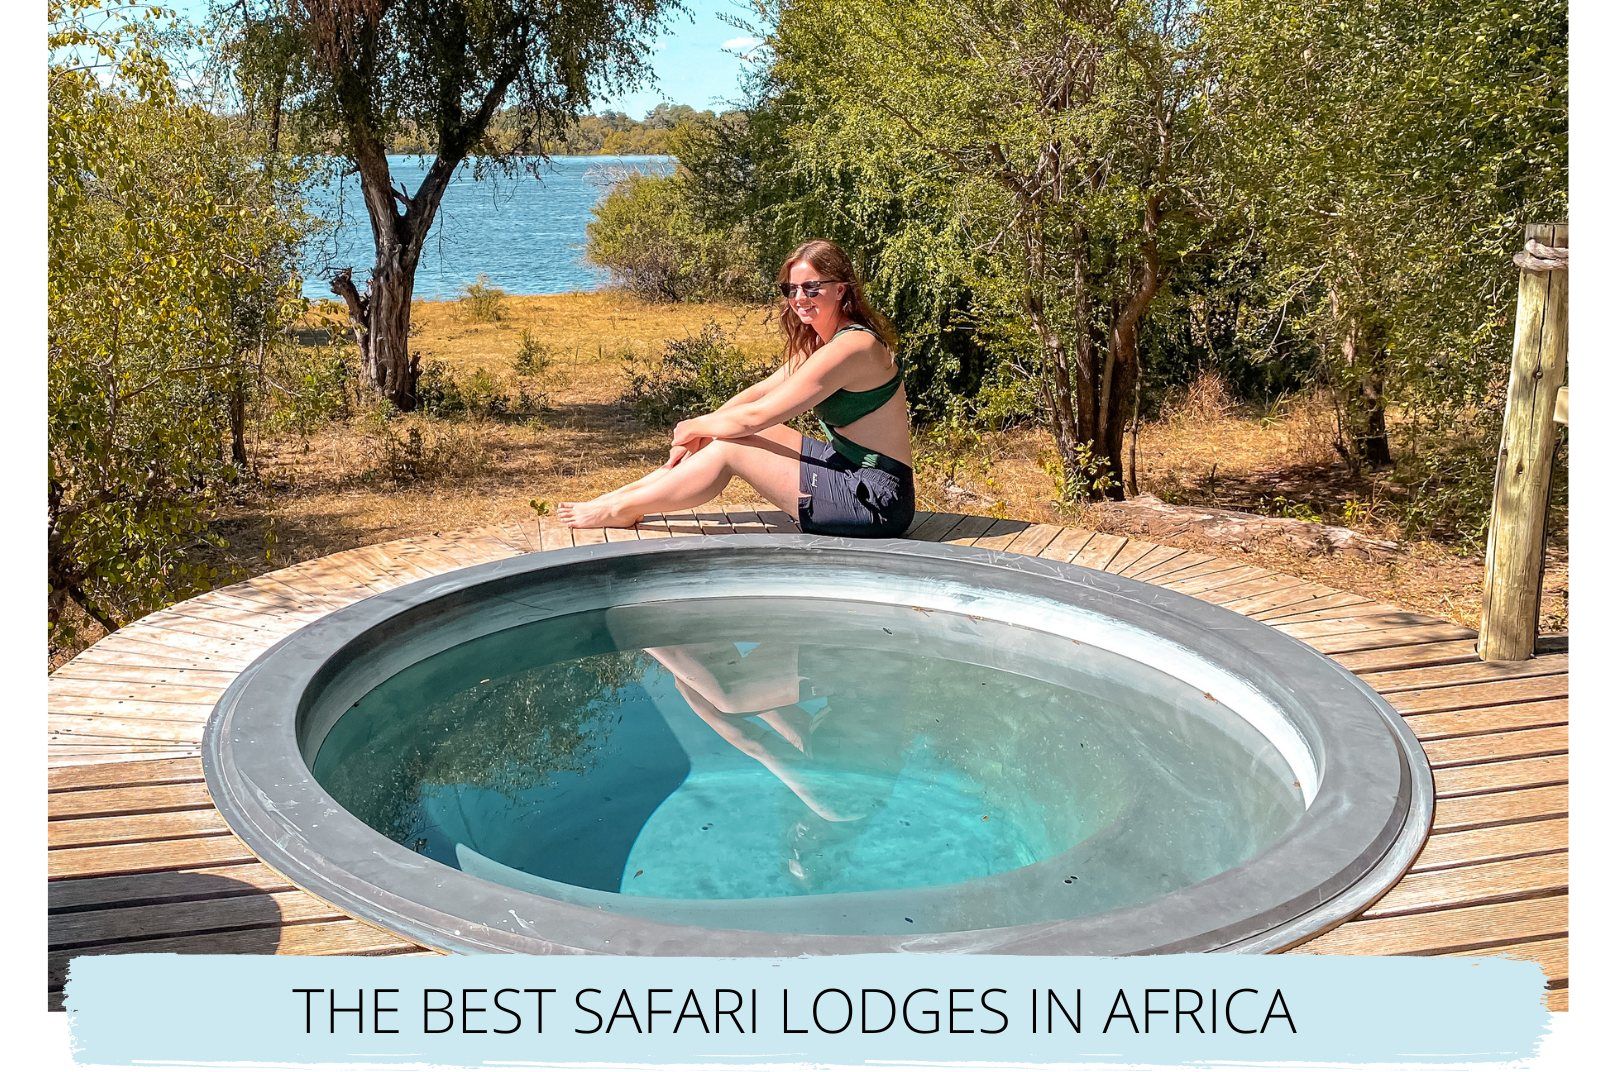 The Ultimate guide to an African safari